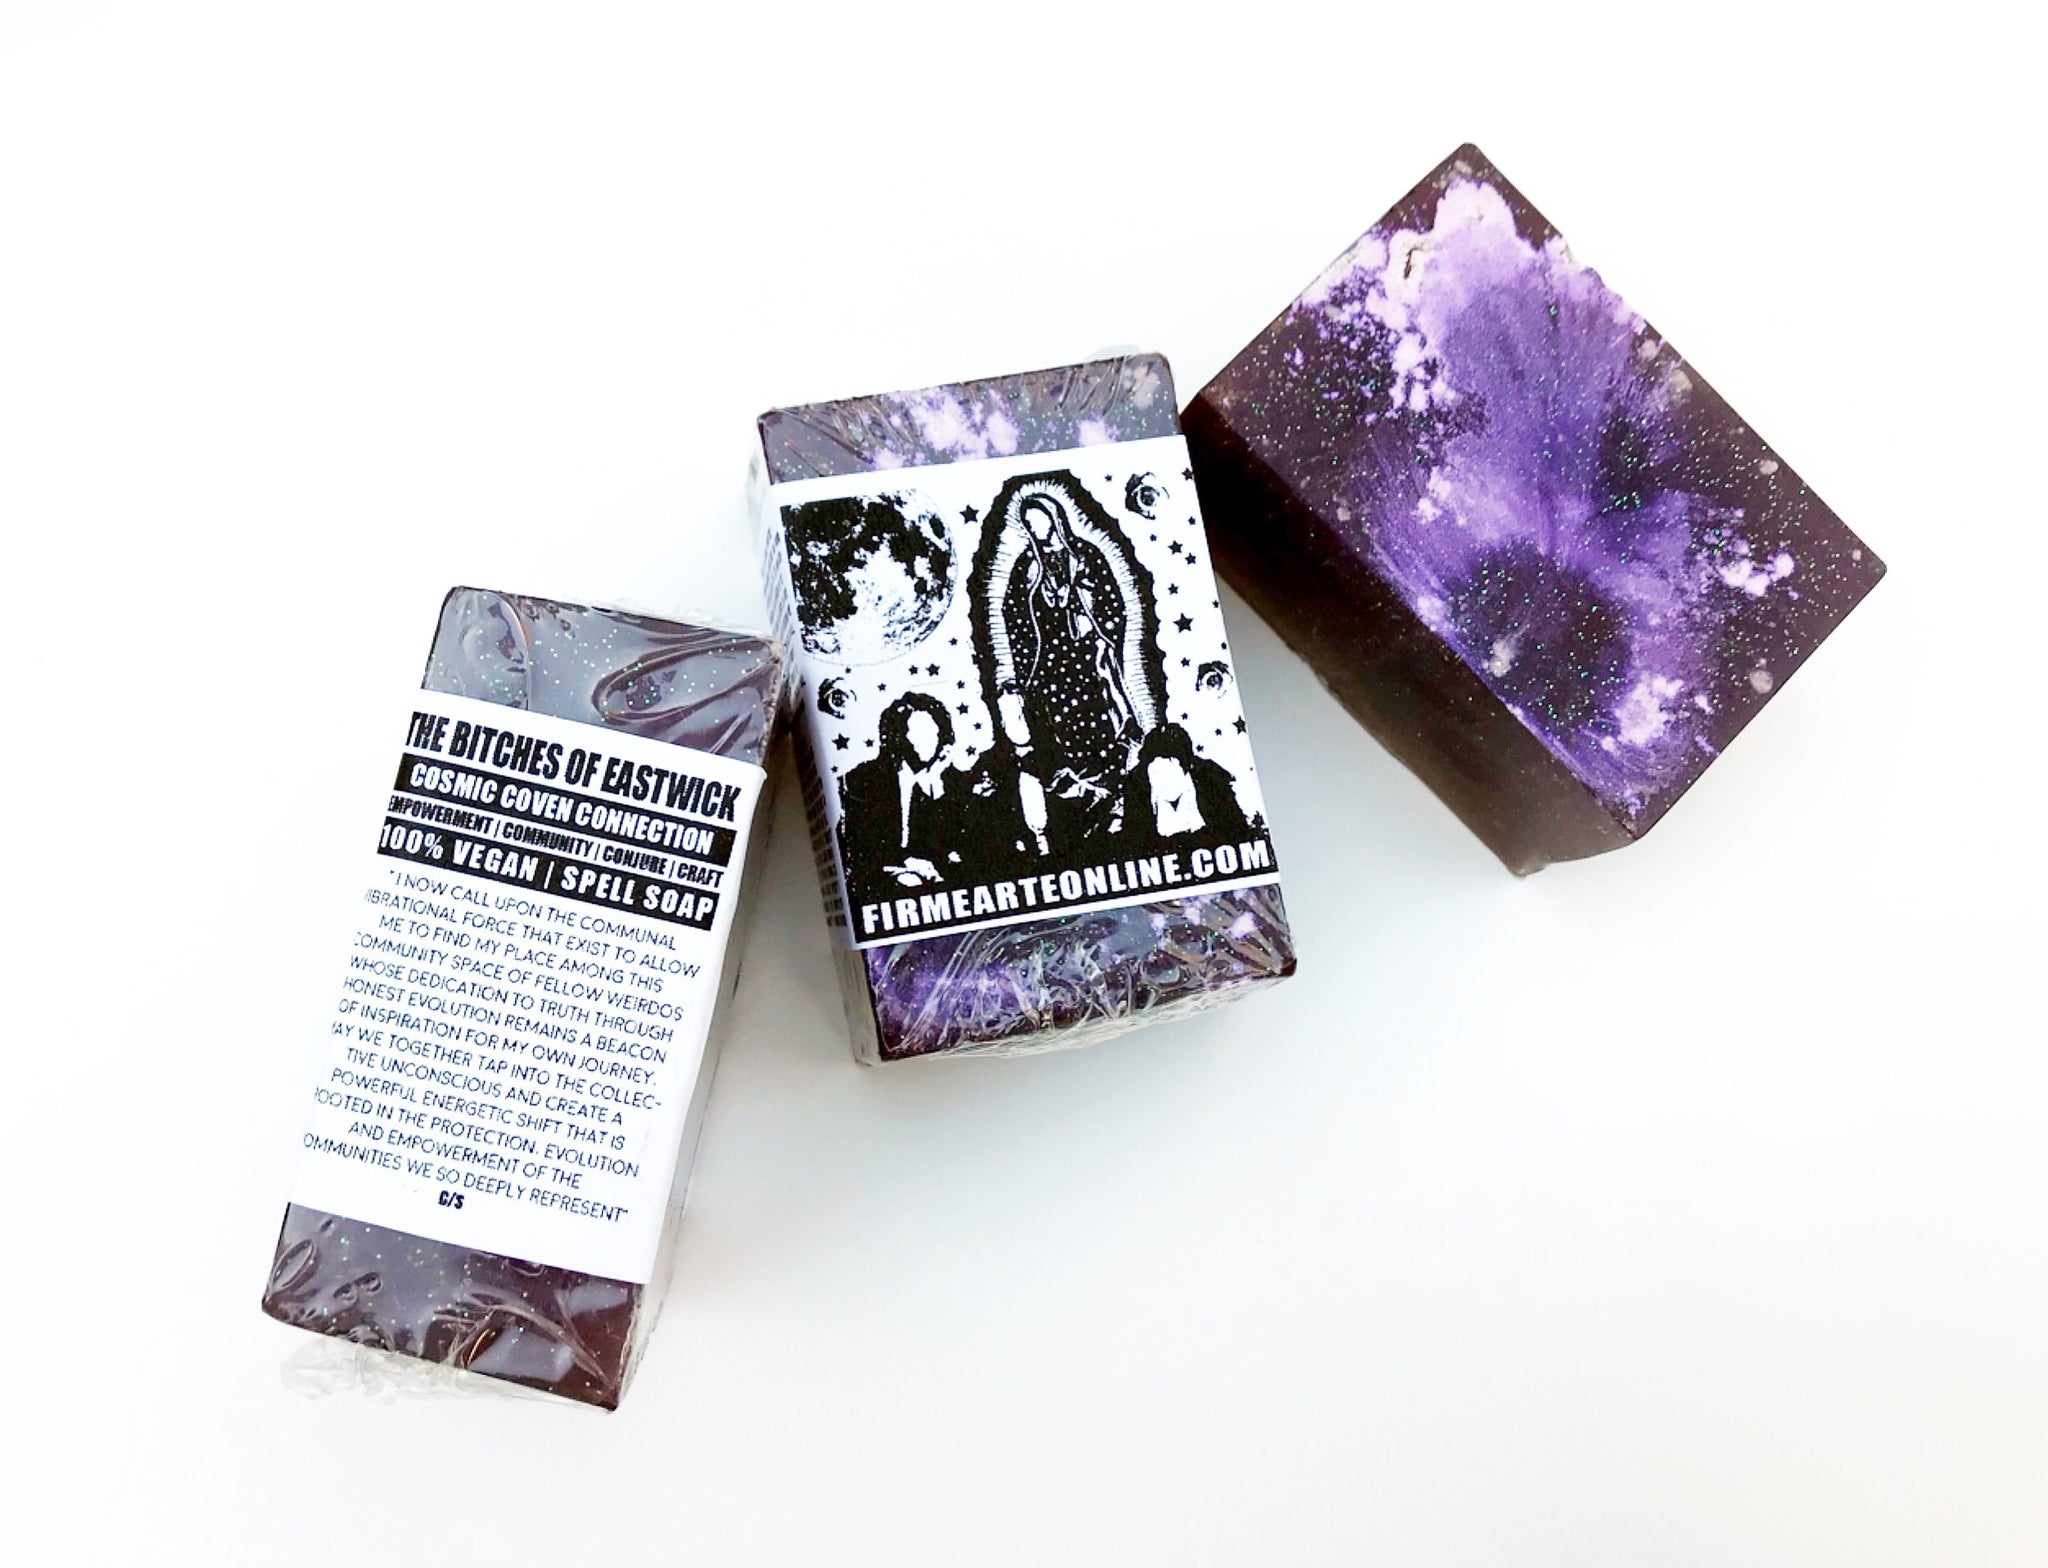 Spell Soap | The Bitches Of Eastwick | Cosmic Coven Connection